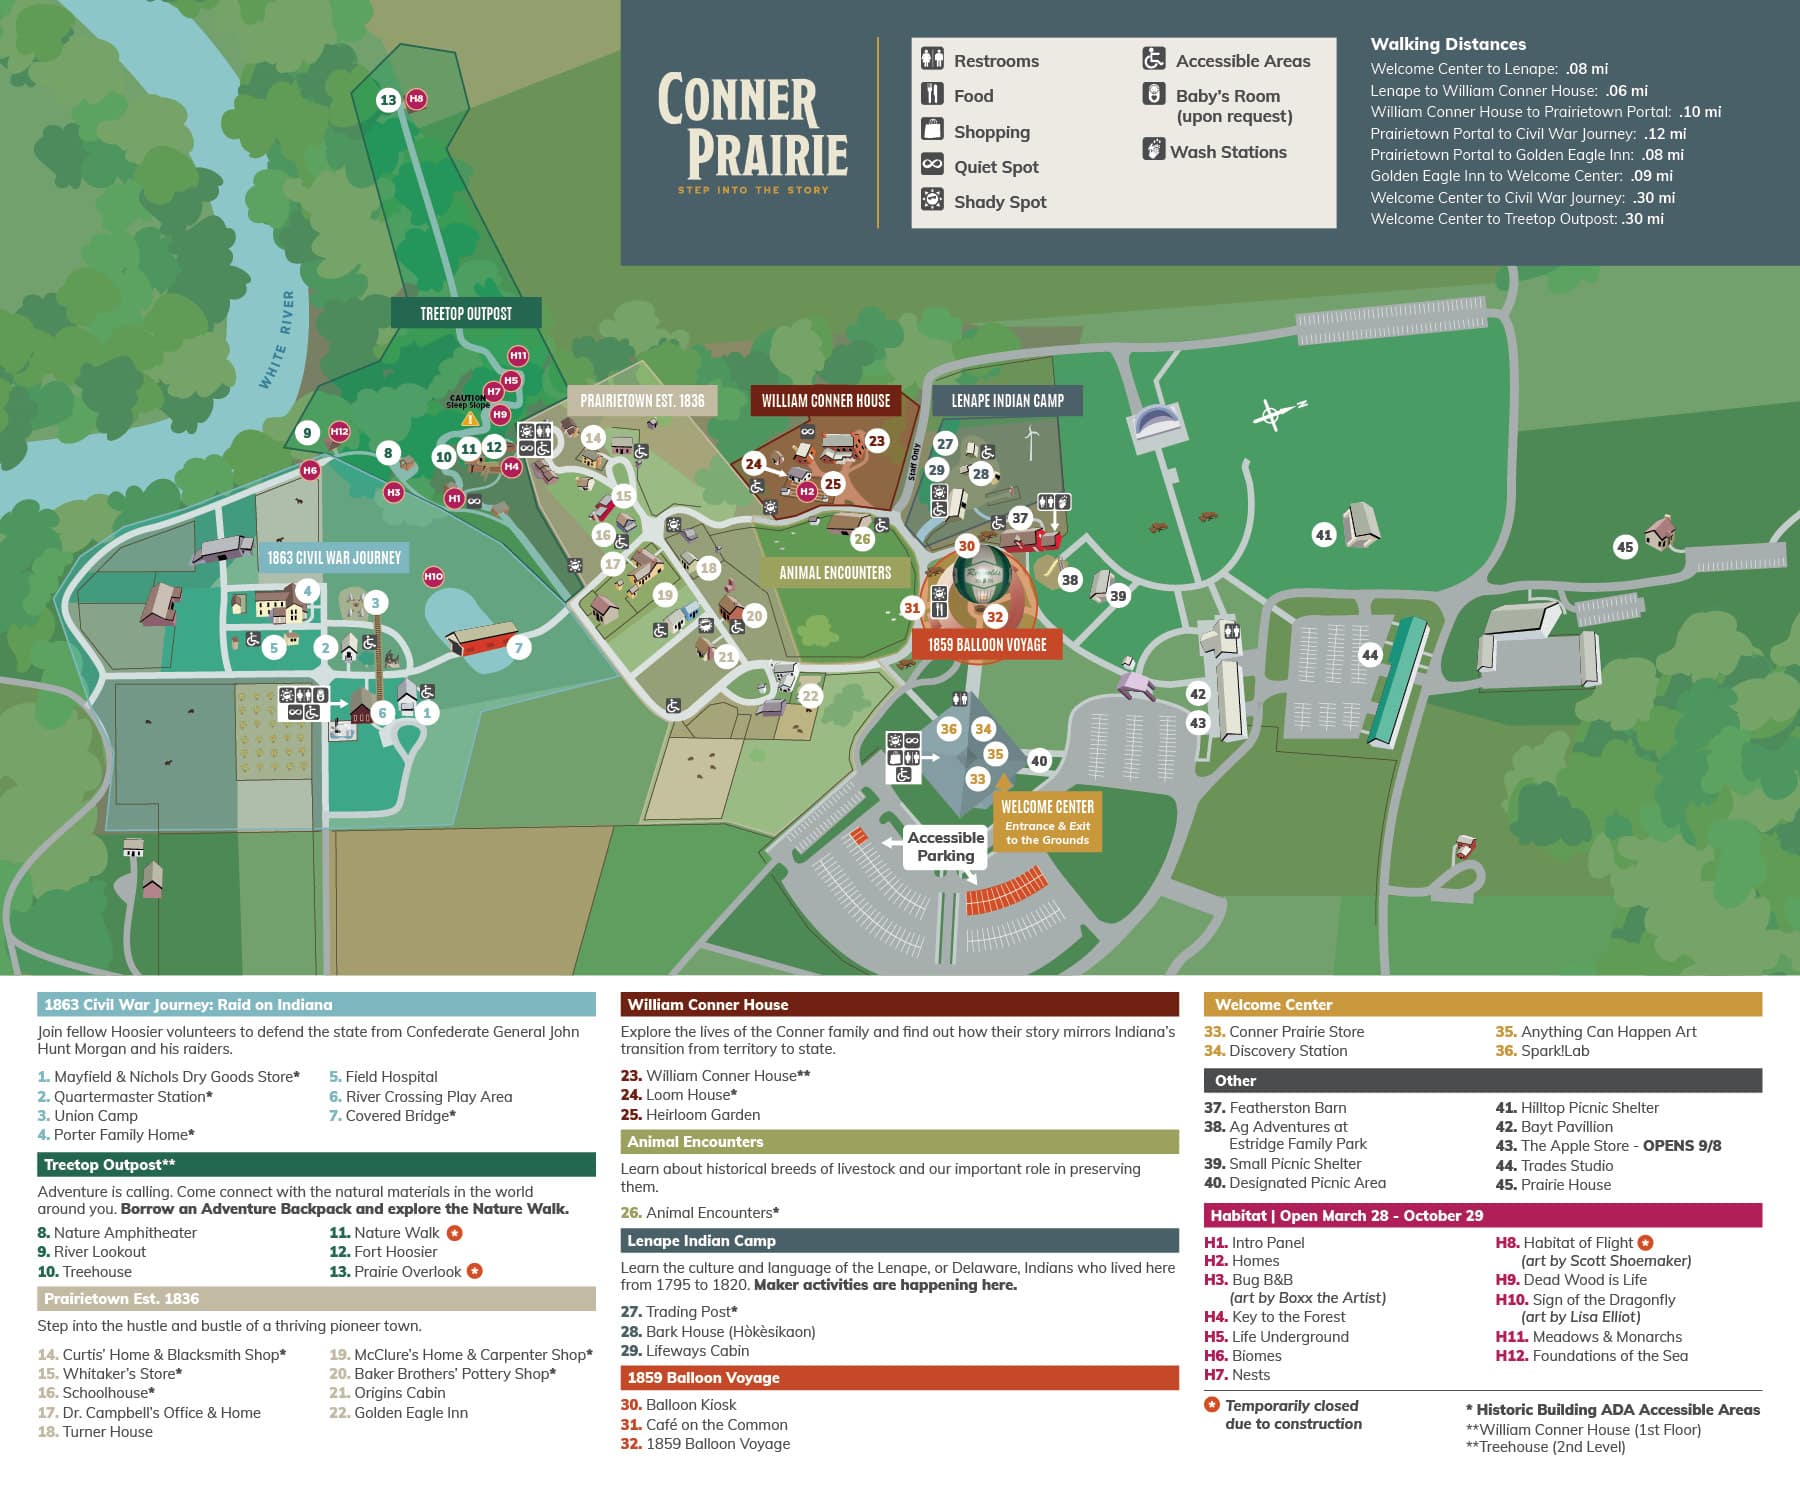 Image of our guest map